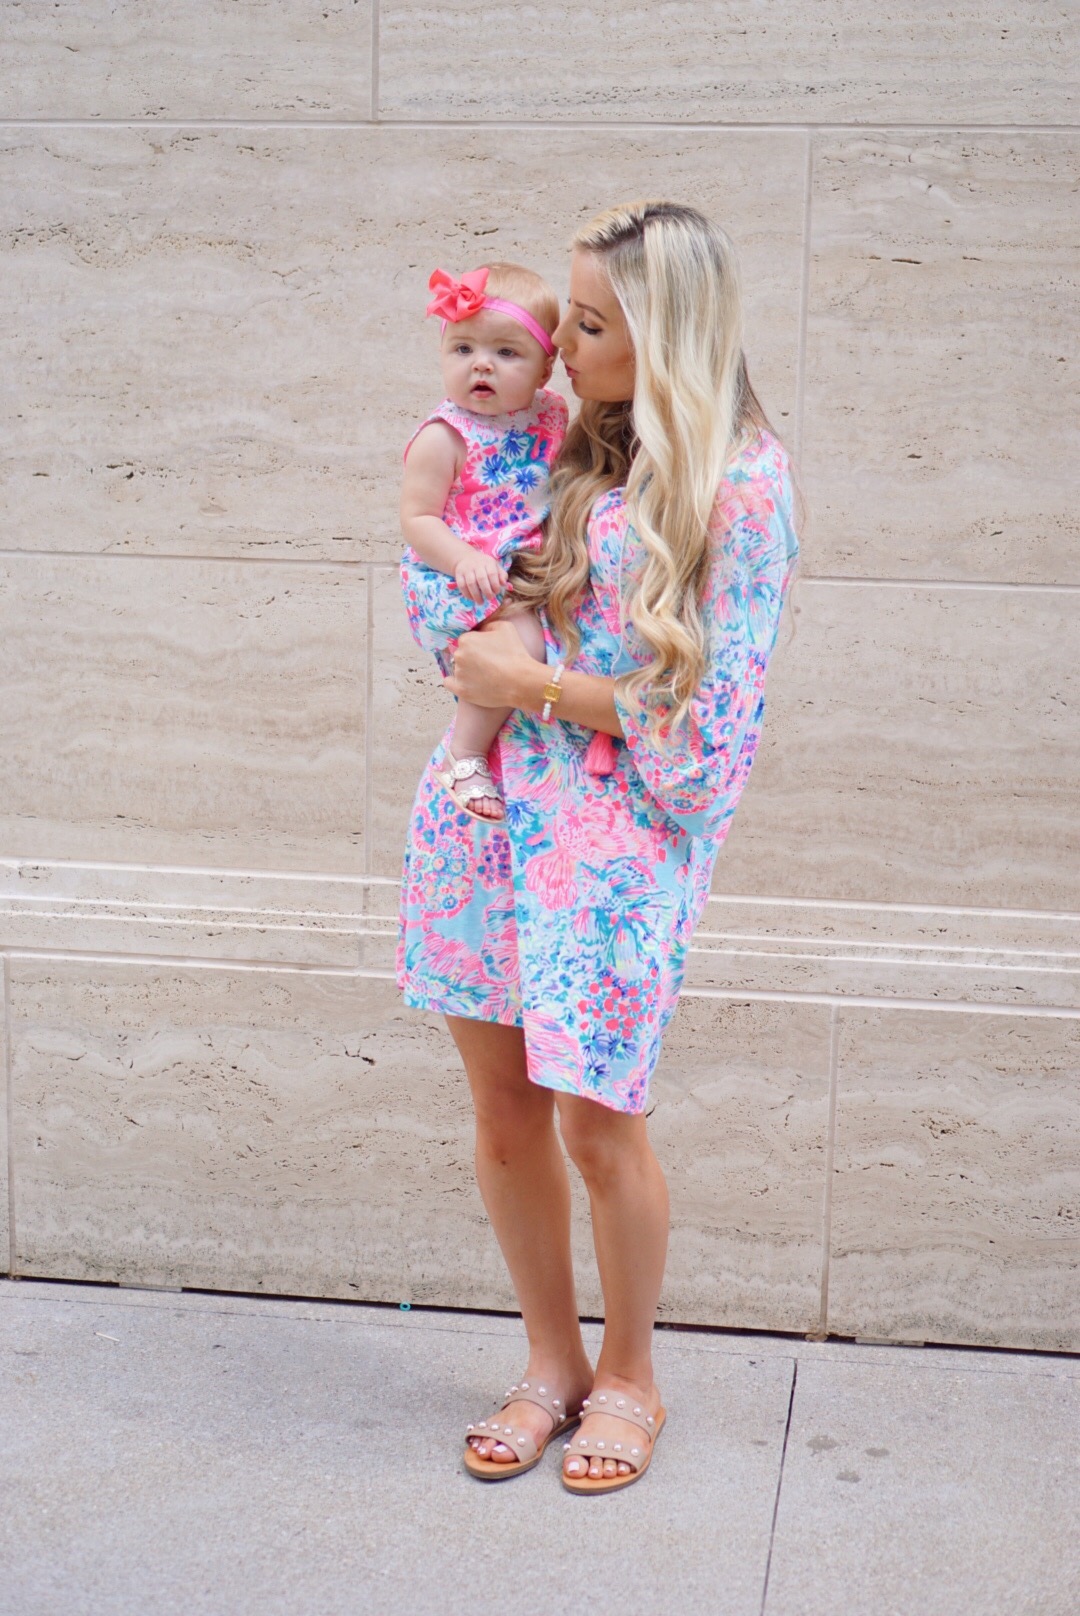 Katelyn Jones A Touch of Pink Blog Baby Girl 9 month old Lily Pulitzer Dress Mommy Daughter Matching